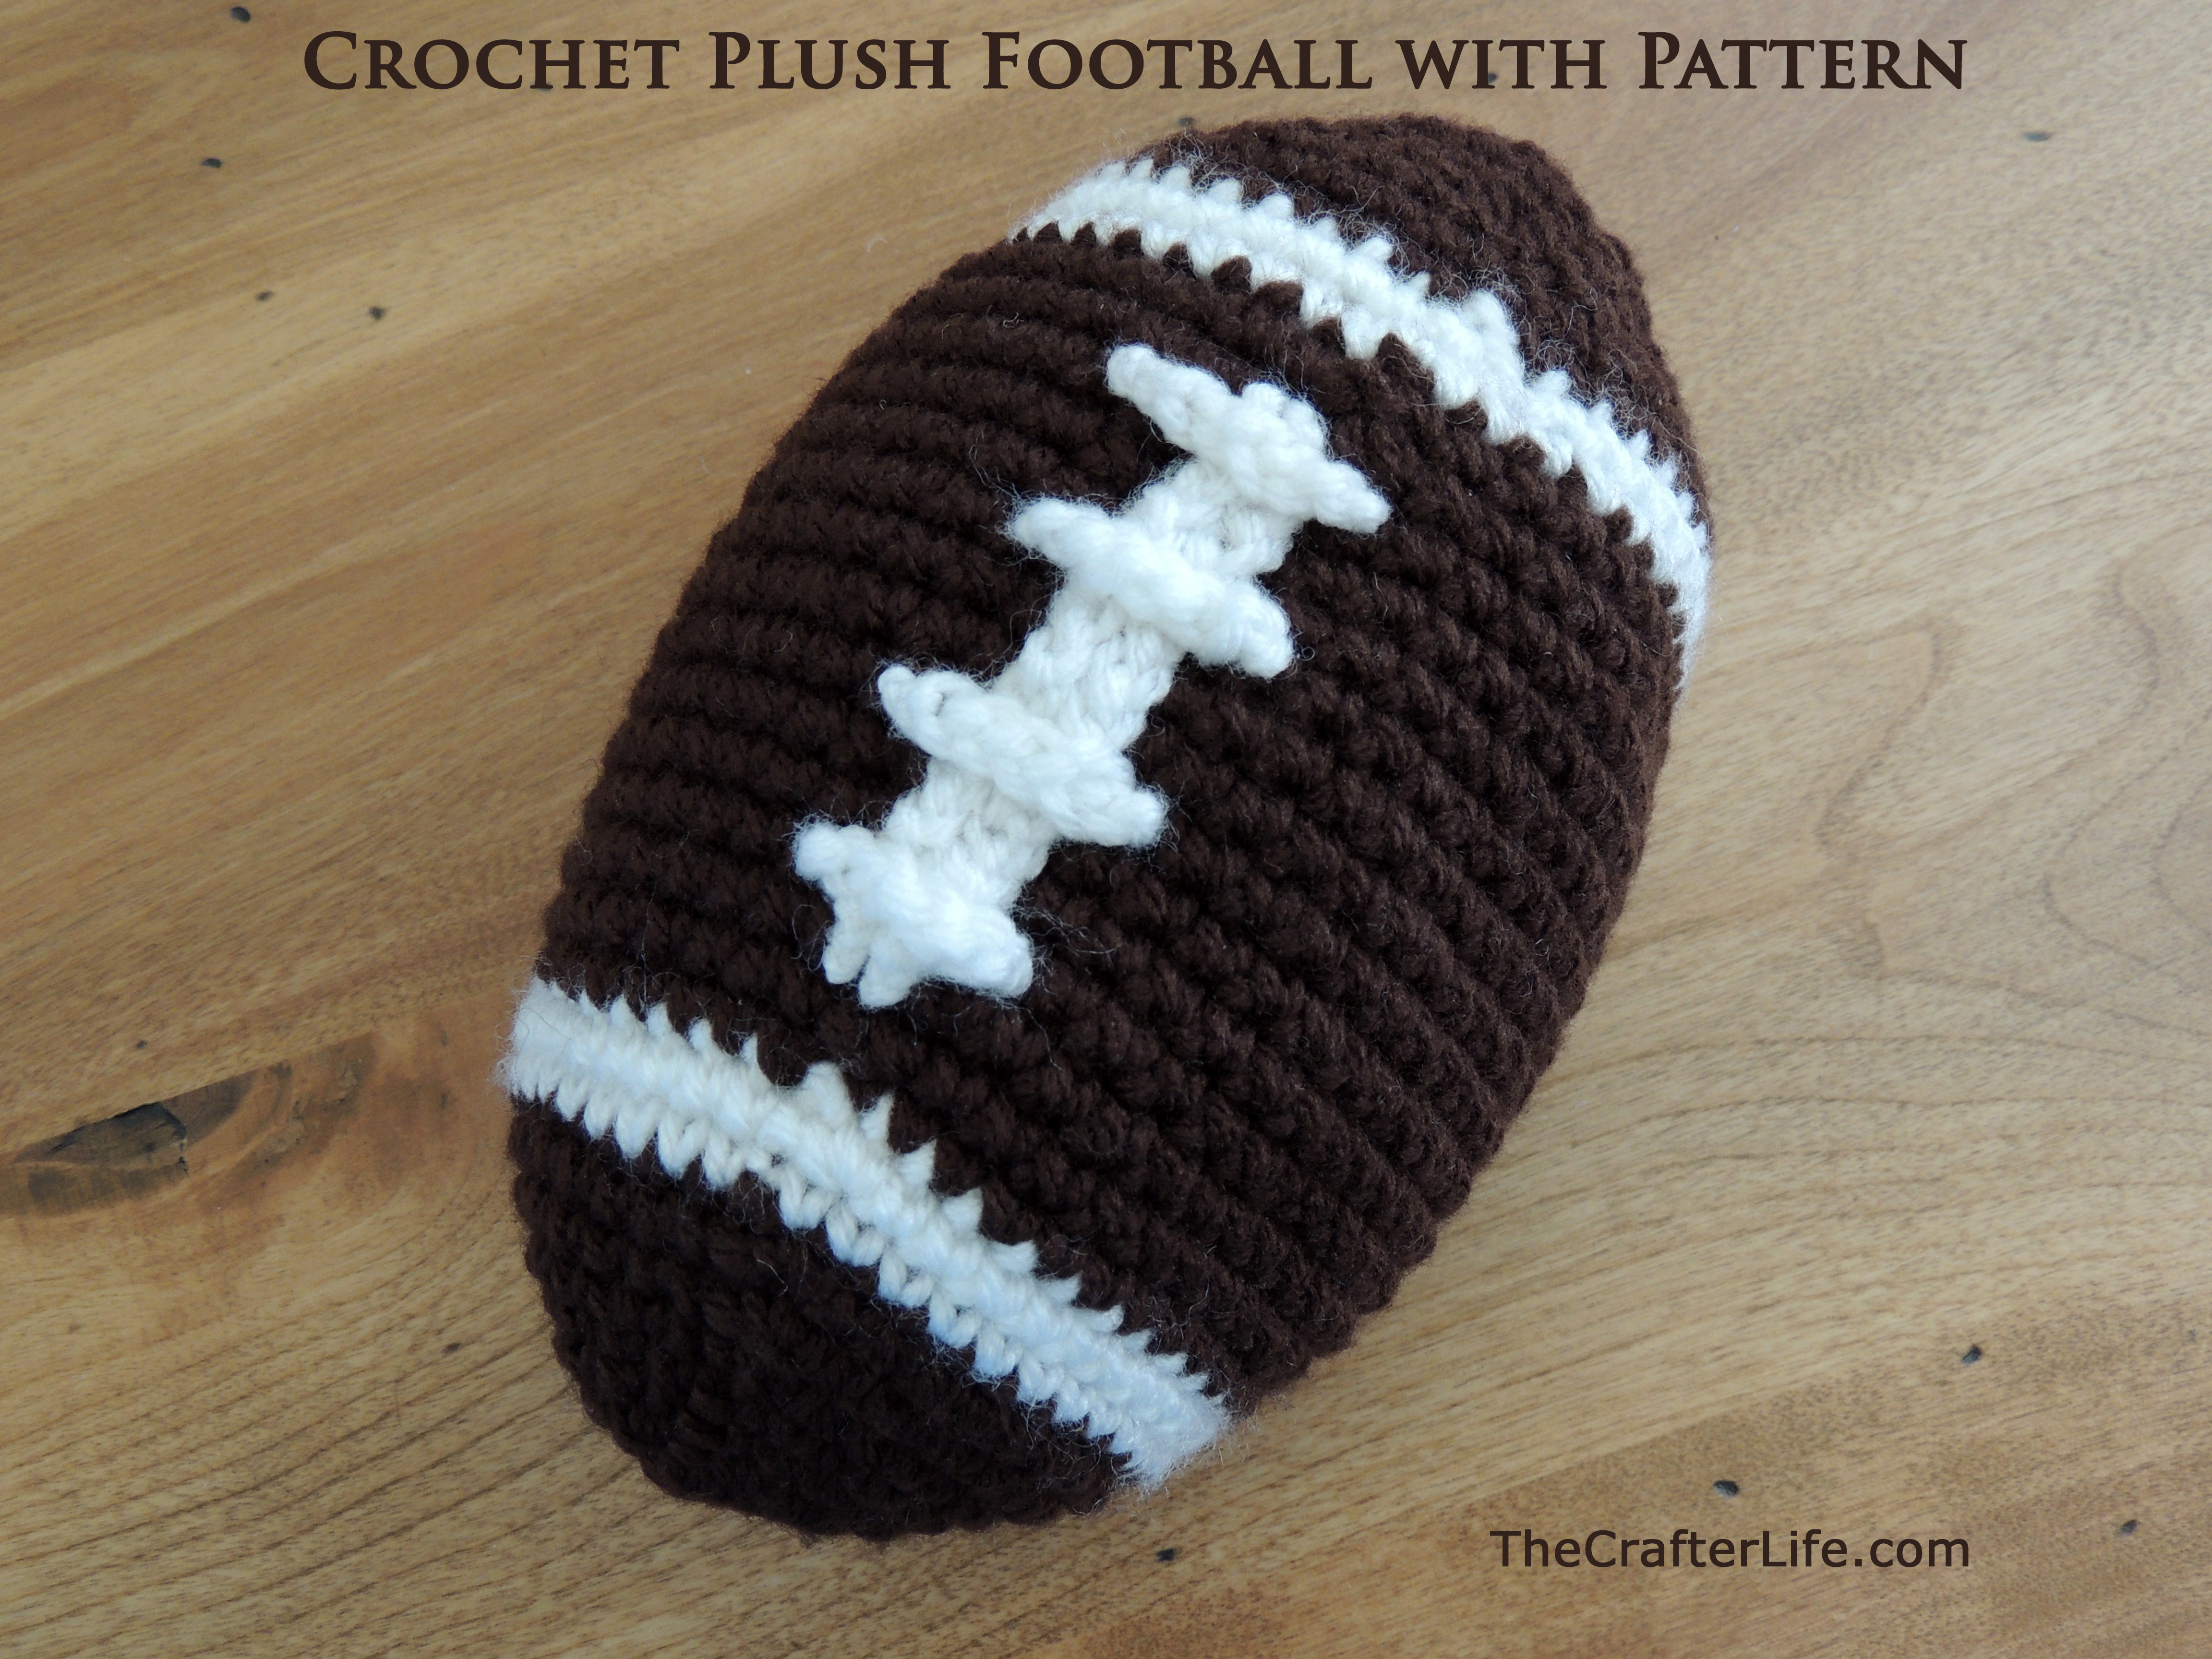 Knitted Ball Pattern Free Crochet Plush Football With Pattern The Crafter Life